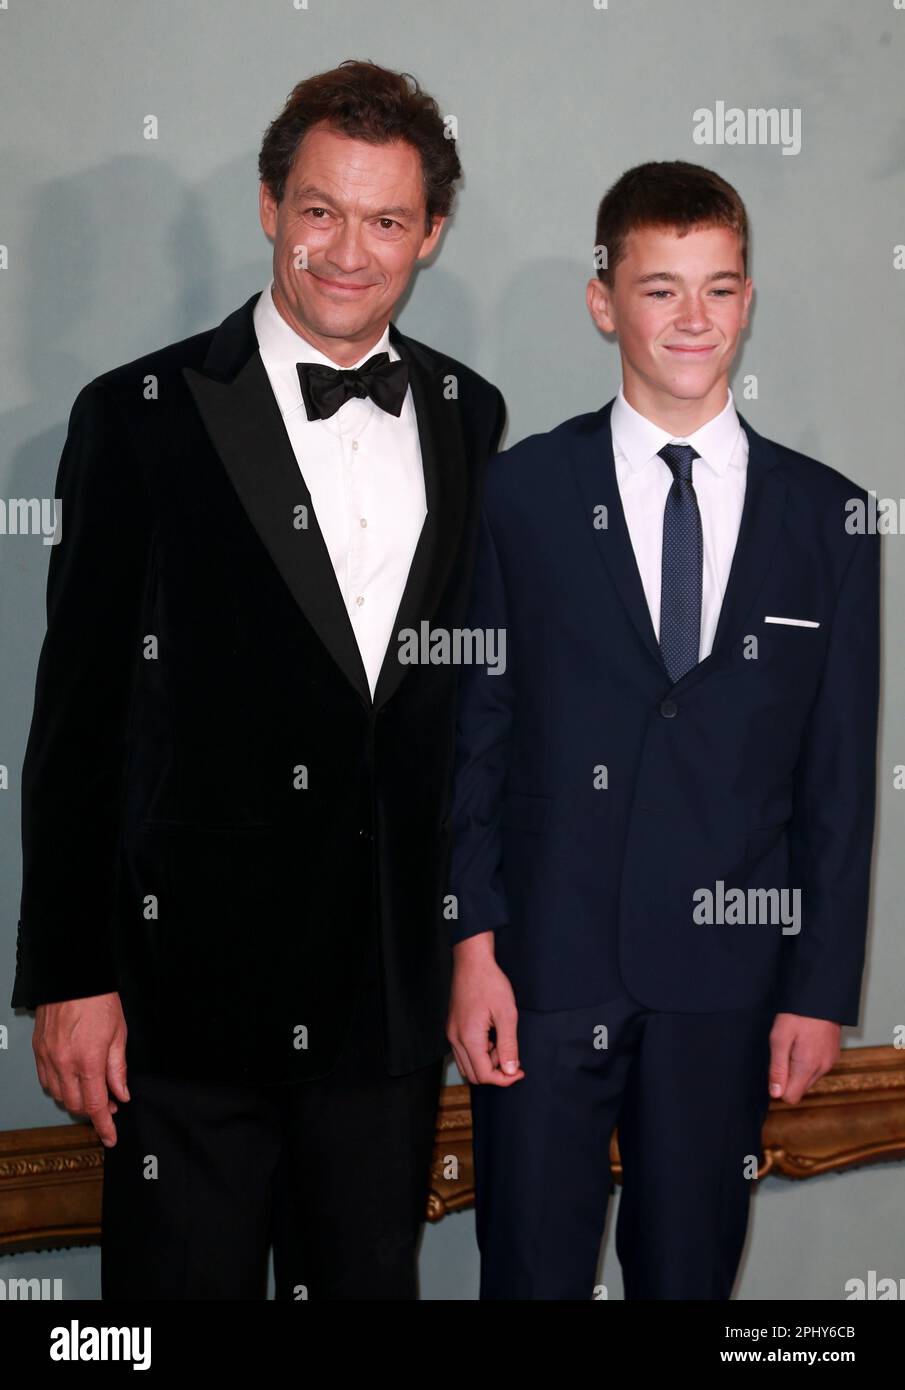 London, UK. 08th Nov, 2022. Senan West and Dominic West attend "The Crown" Season 5 World Premiere at Theatre Royal Drury Lane in London. (Photo by Fred Duval/SOPA Images/Sipa USA) Credit: Sipa USA/Alamy Live News Stock Photo